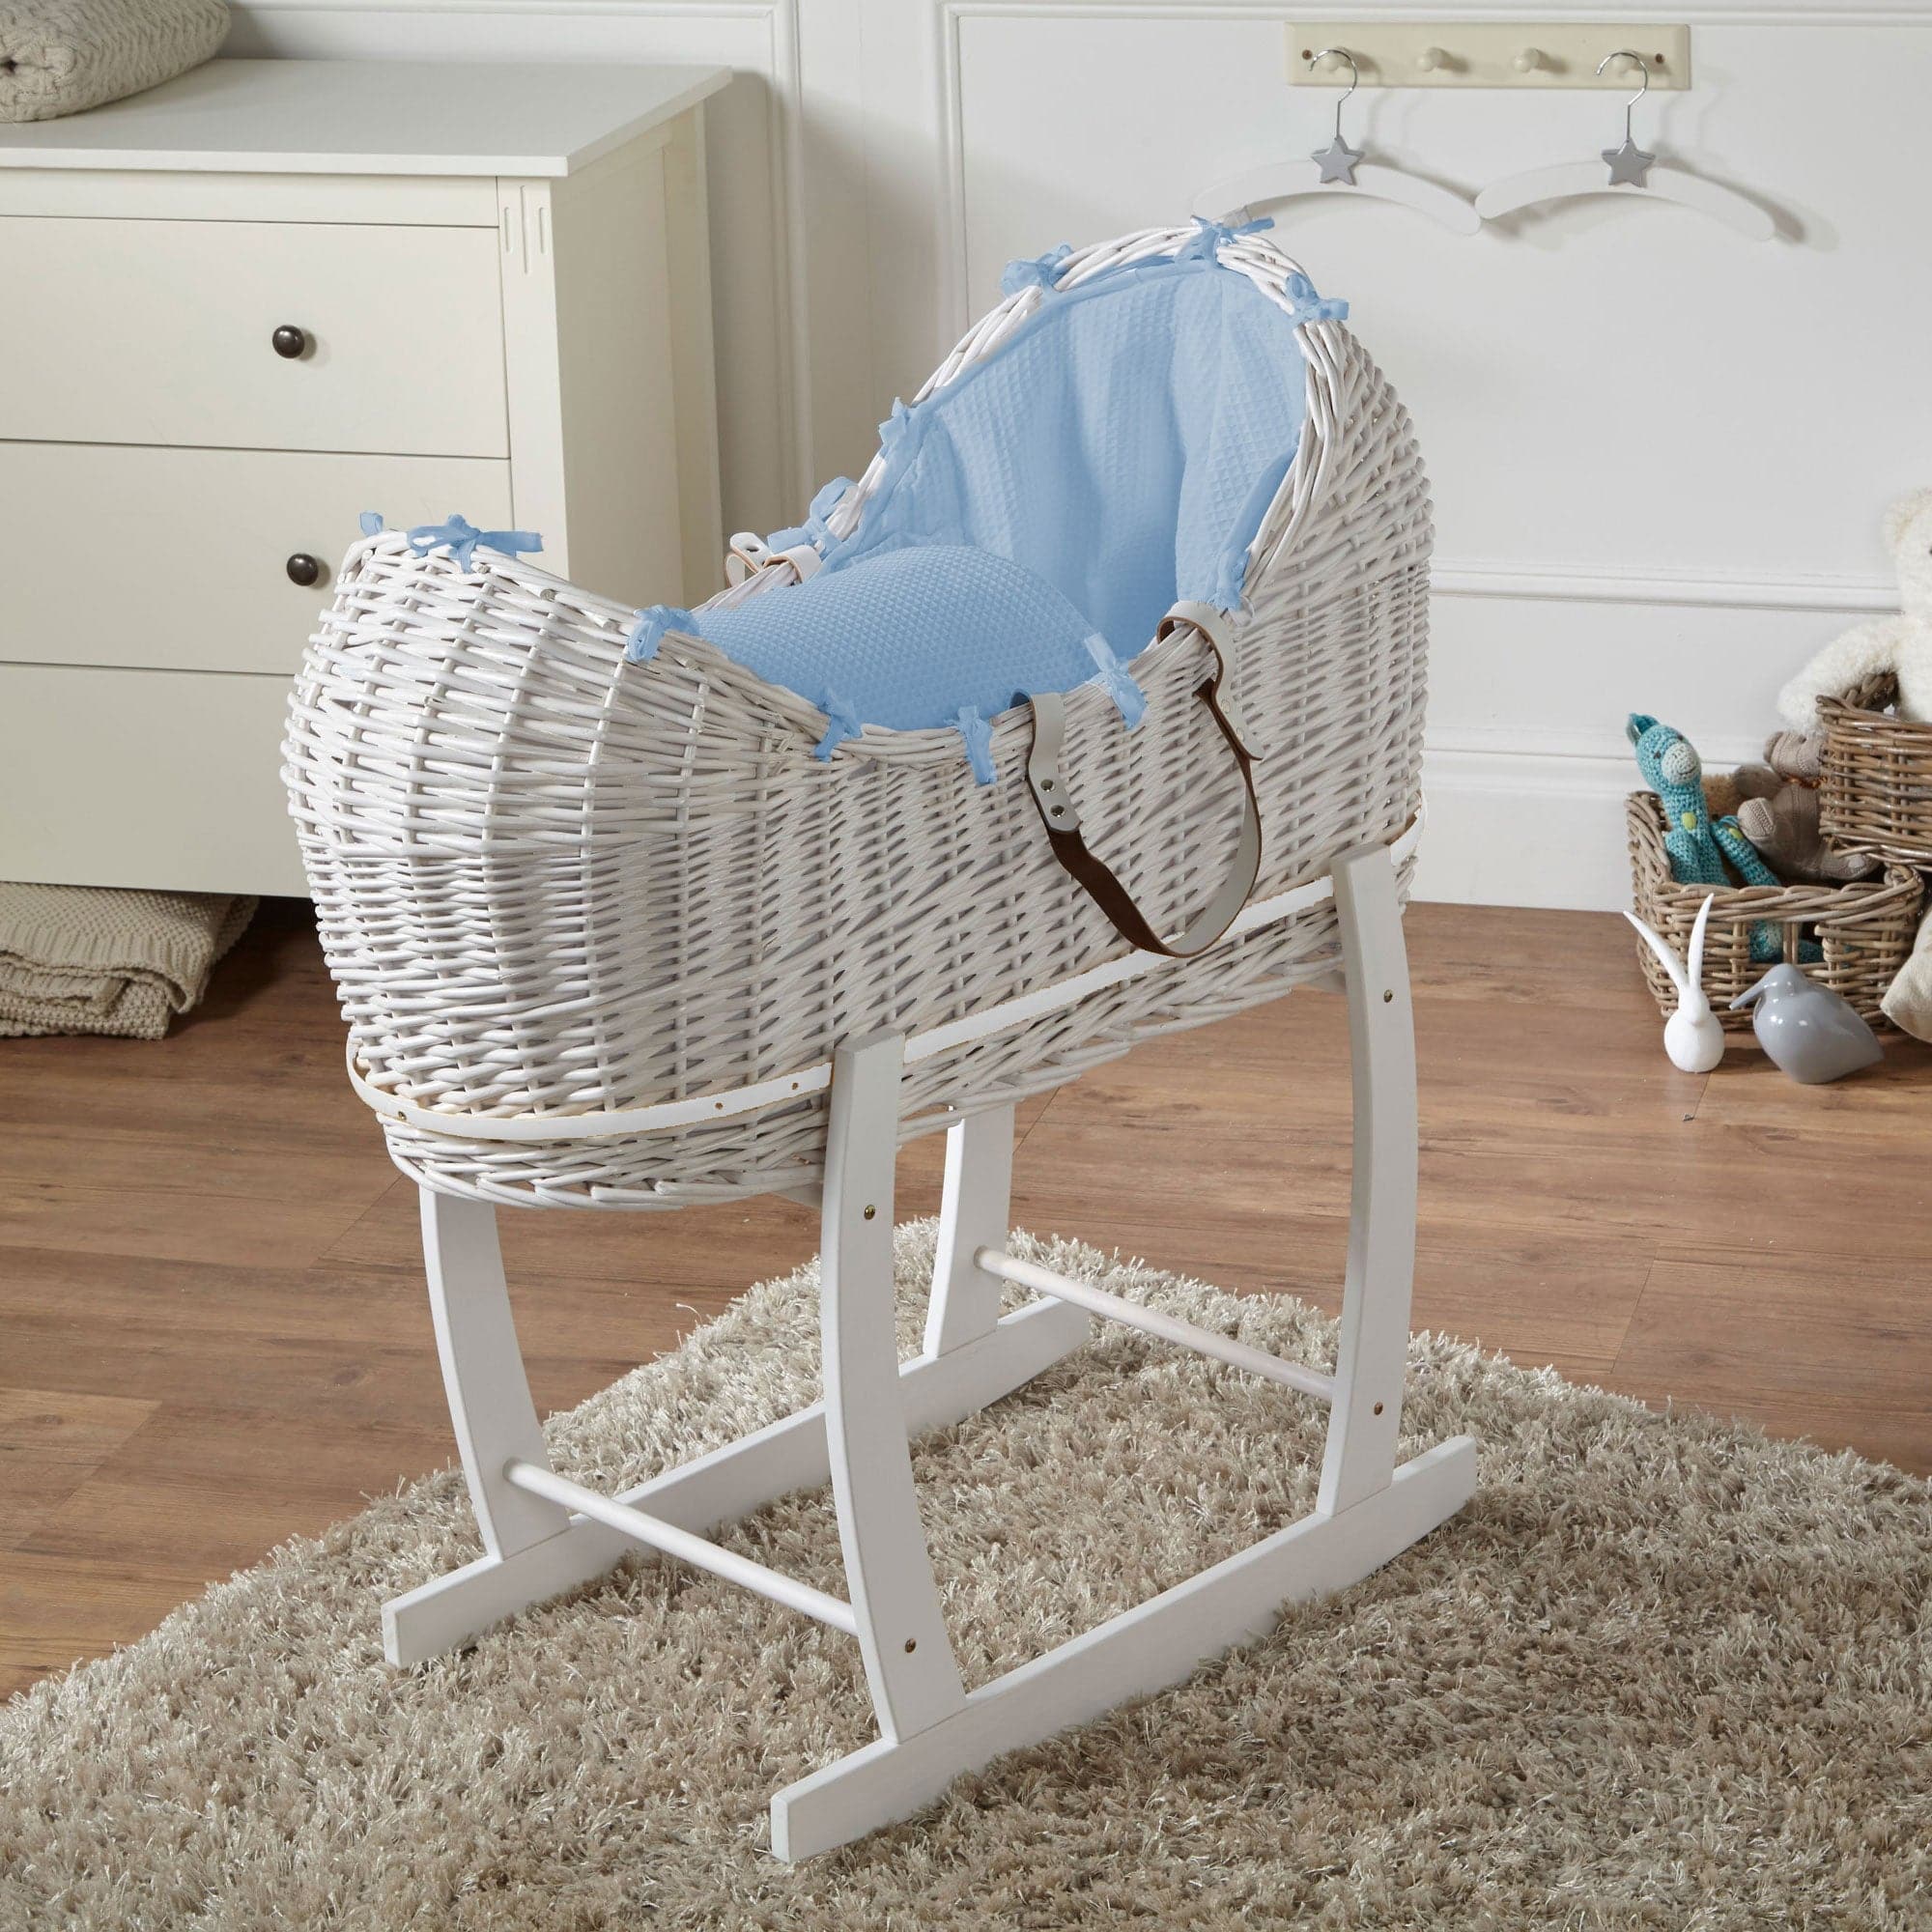 Wicker Deluxe Pod Baby Moses Basket With Stand - White / Waffle / Blue | For Your Little One